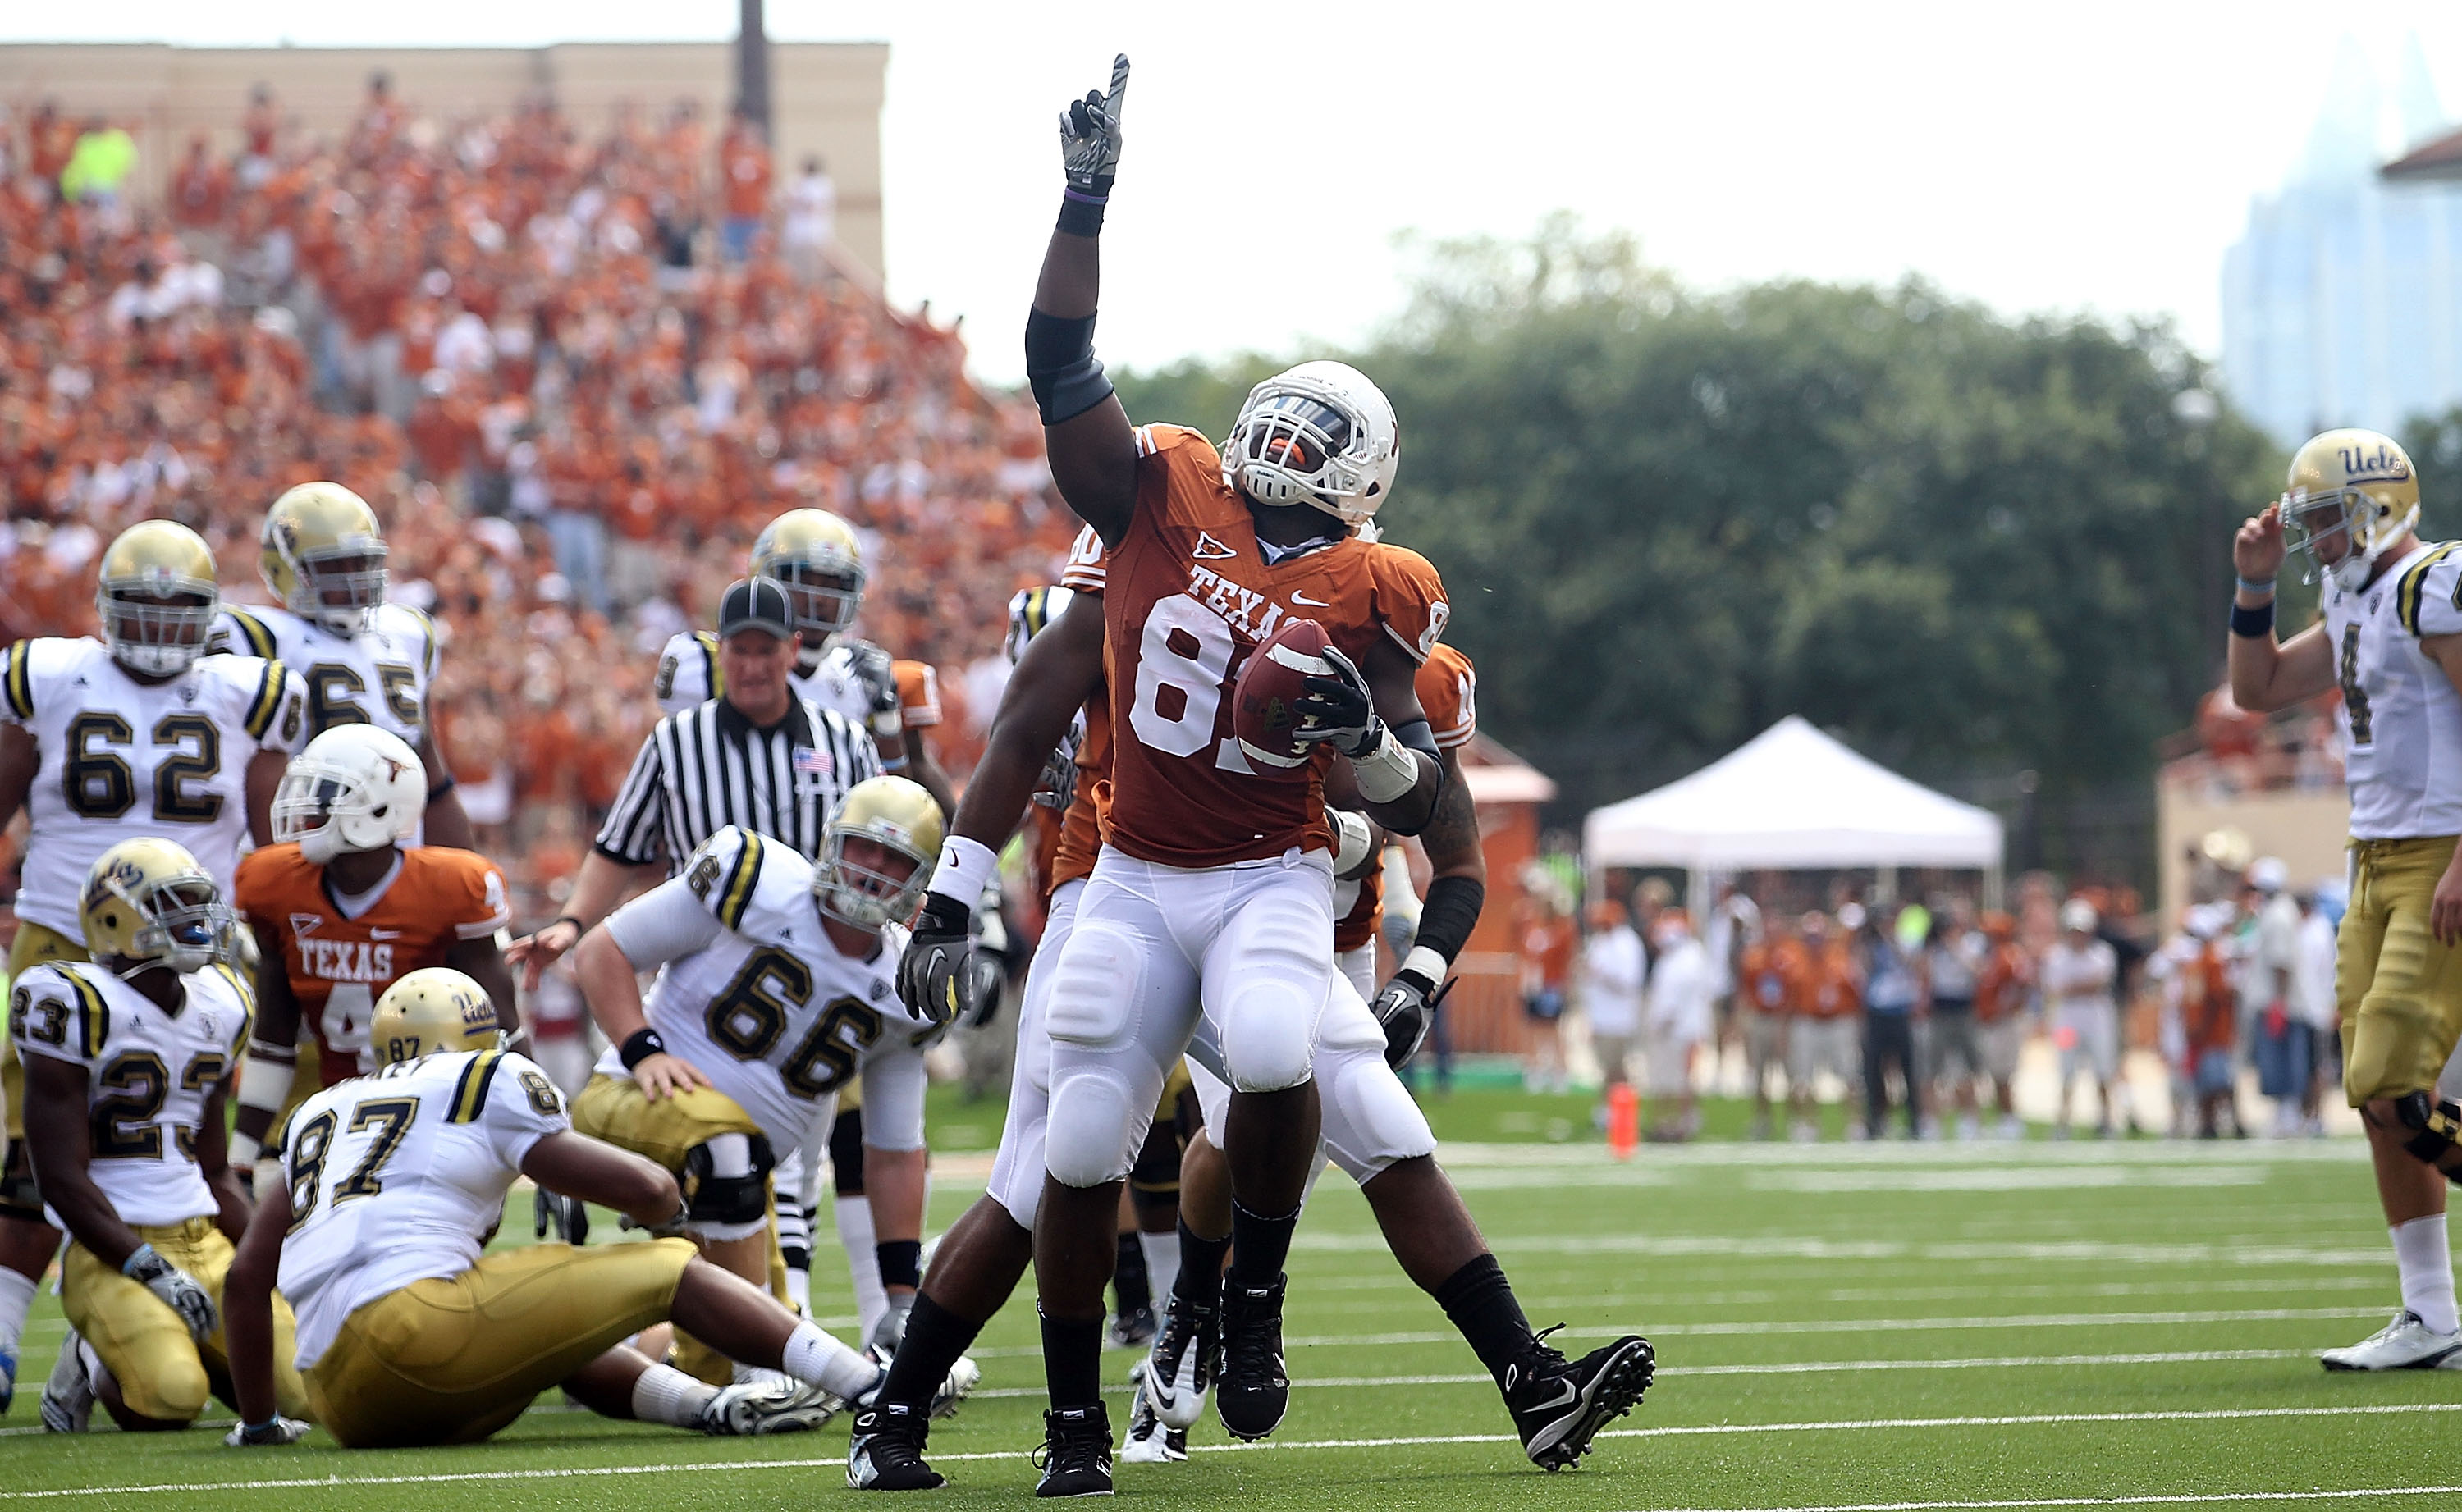 AUSTIN, TX - SEPTEMBER 25:  Defensive end Sam Acho #81 of the Texas Longhorns reacts after making a fumble recovery against the UCLA Bruins at Darrell K Royal-Texas Memorial Stadium on September 25, 2010 in Austin, Texas.  (Photo by Ronald Martinez/Getty